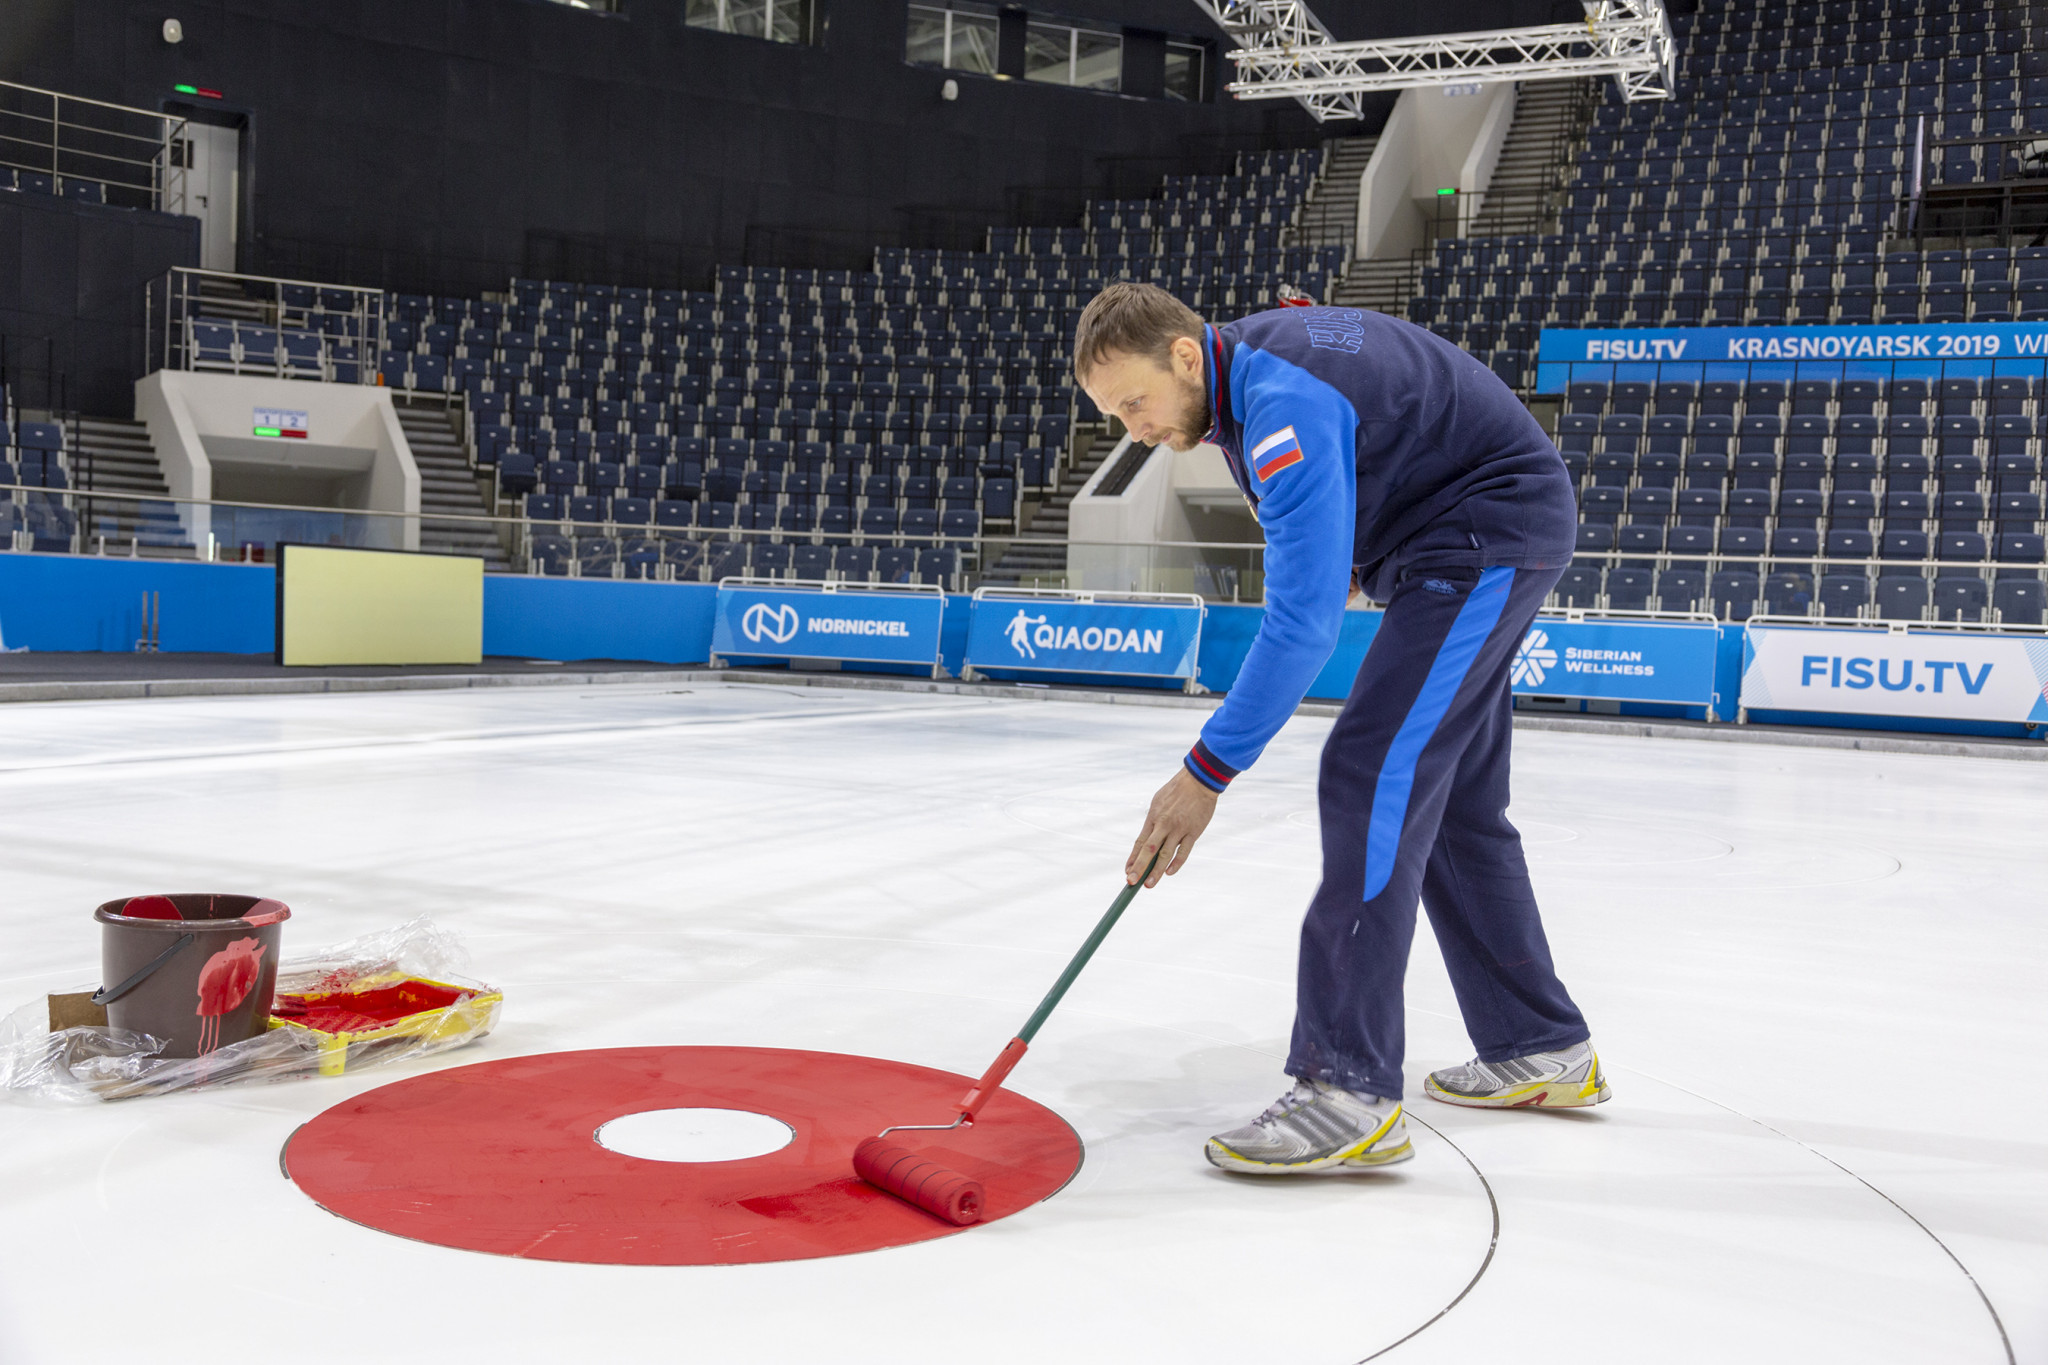 The final touches have been applied to the curling surface for the event ©Krasnoyarsk 2019